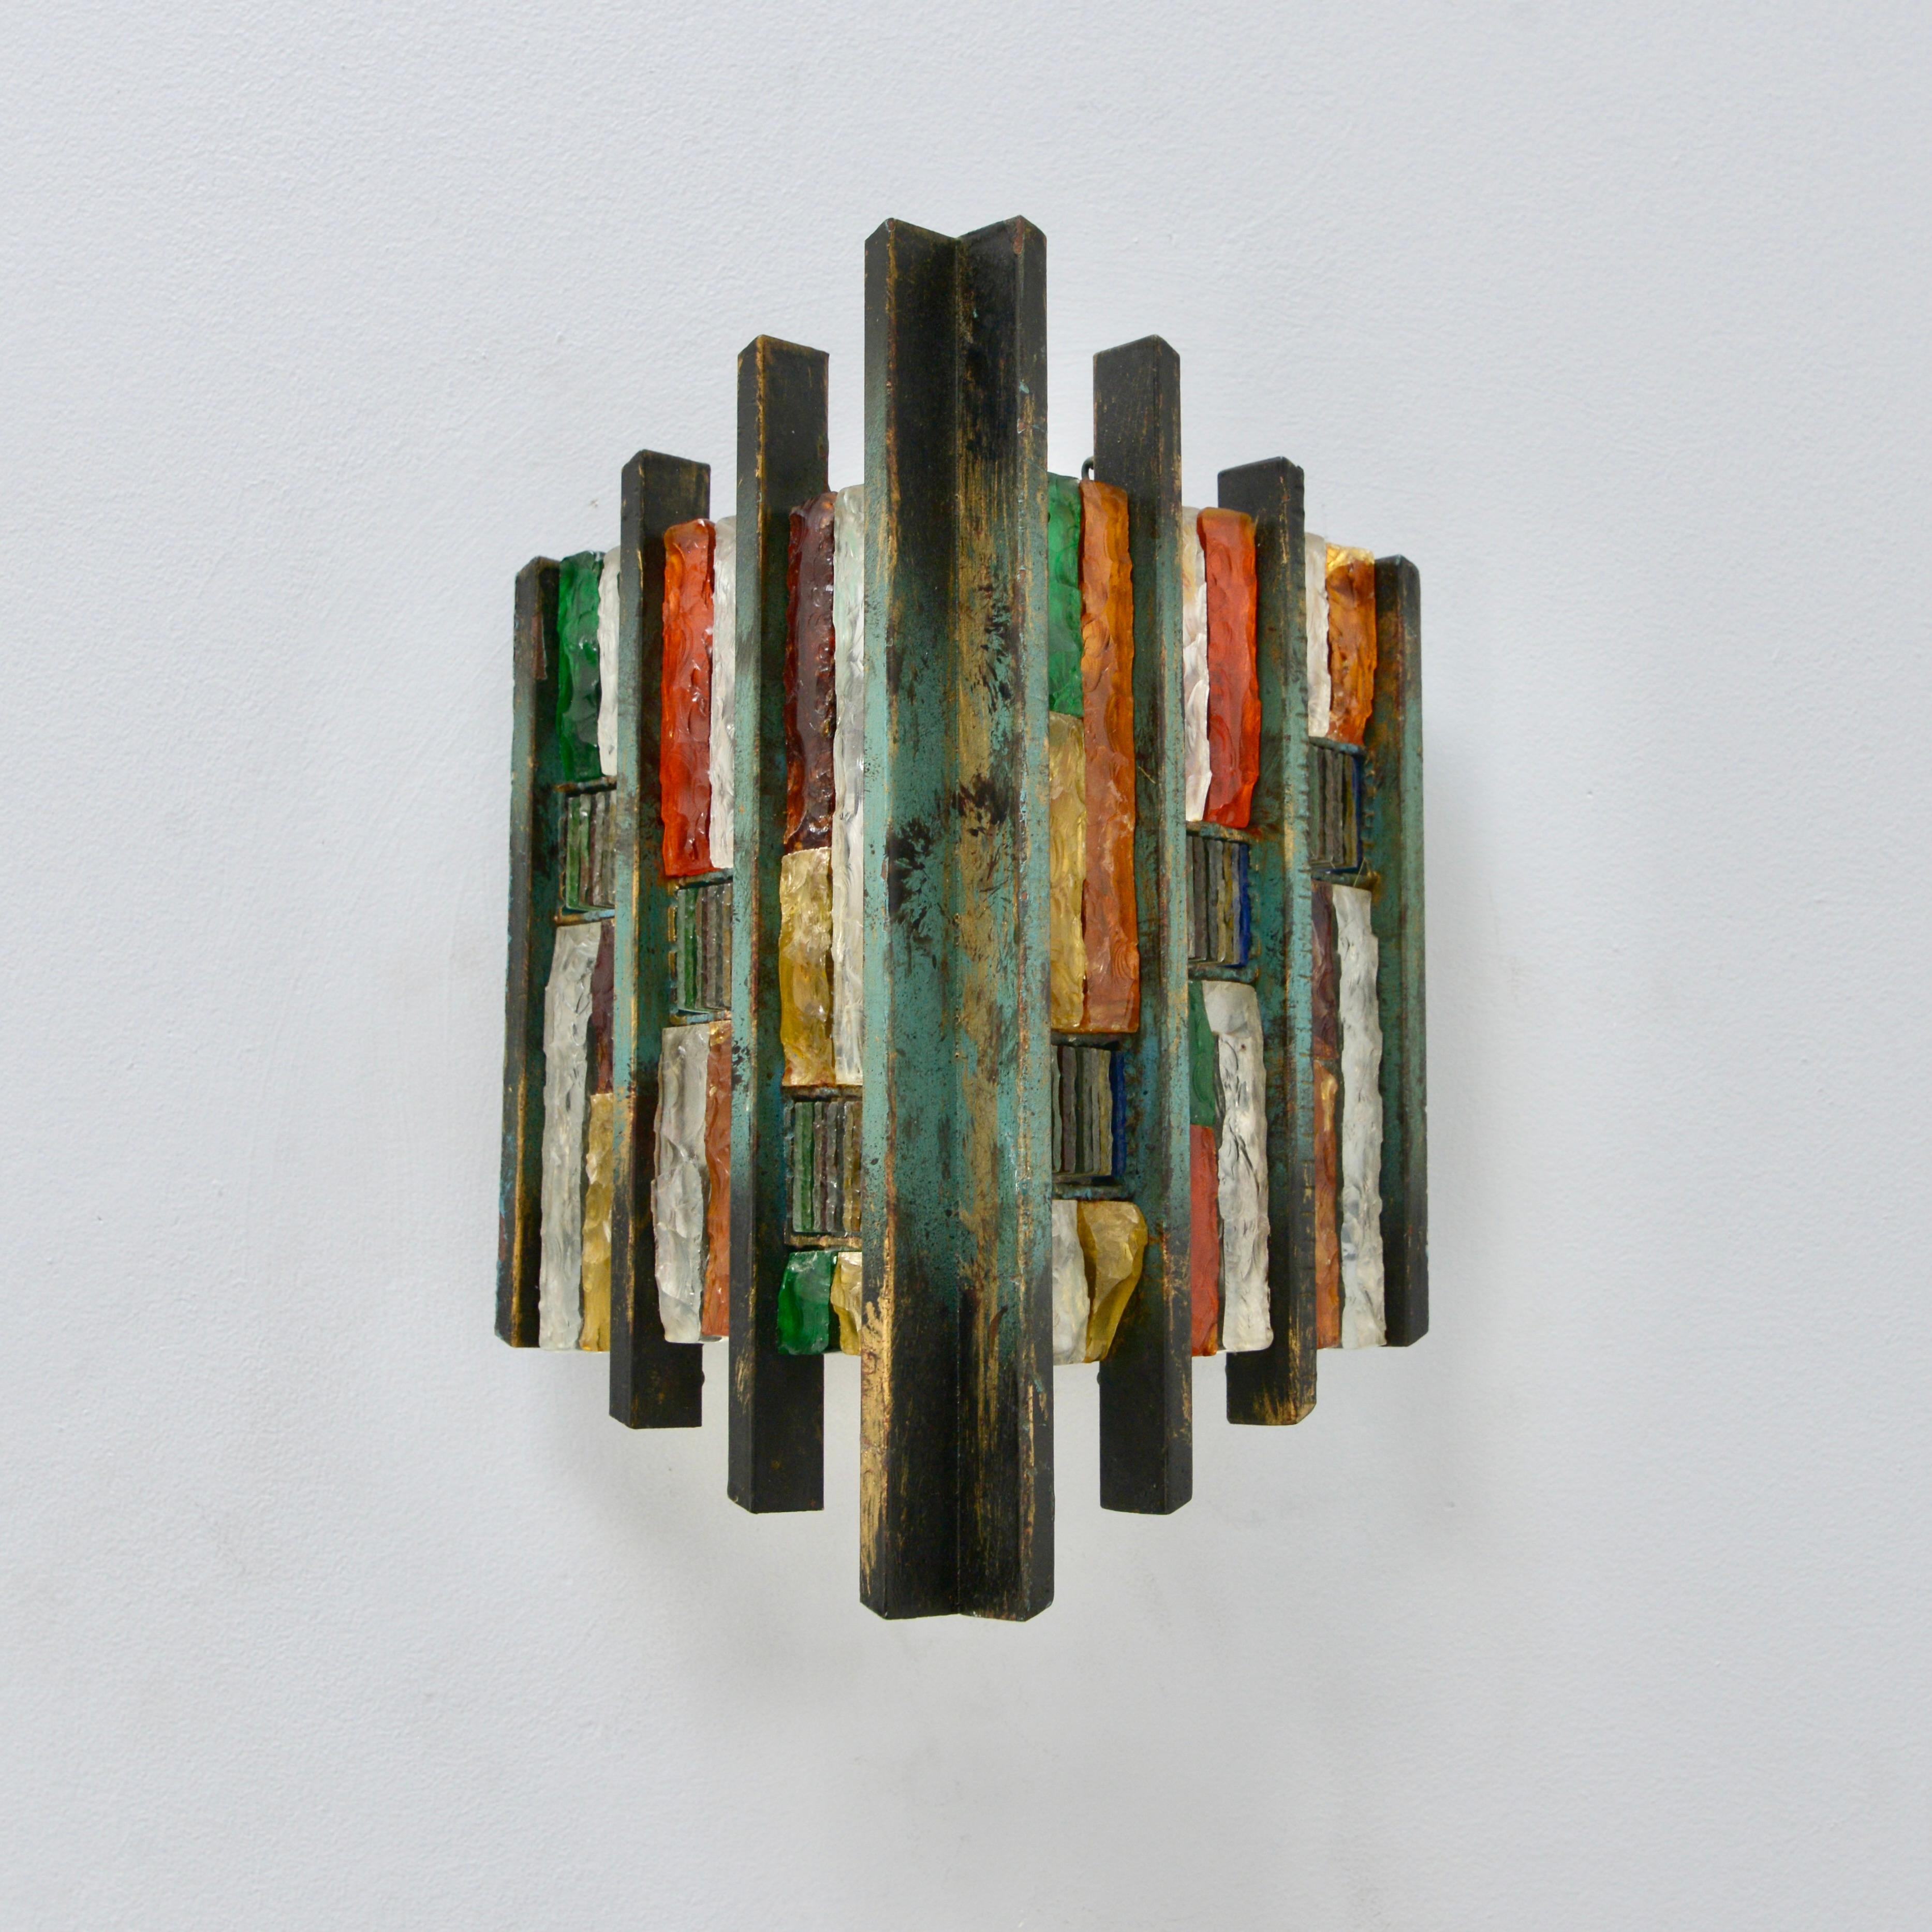 Pair of fantastic Brutalist glass Poliarte sconces from Italy of the 1970s. In multicolored glass and steel in original finish. Wired with a single E-26 medium based socket per sconce. These fixtures can be wired for any worldwide location. Light